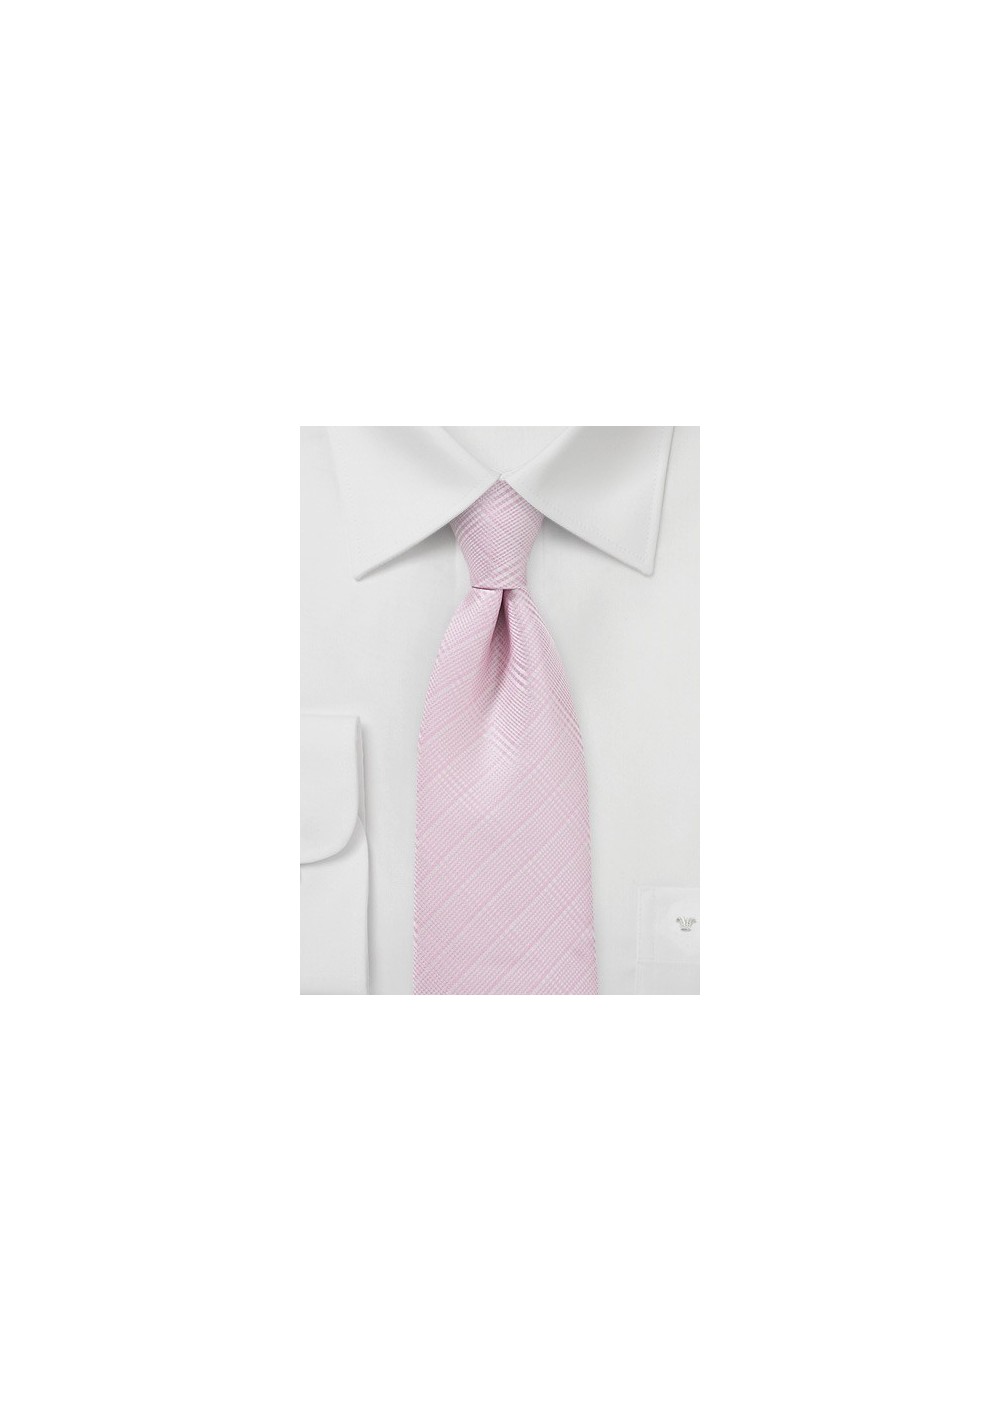 Rose Pink Tie with Trendy Plaid Design